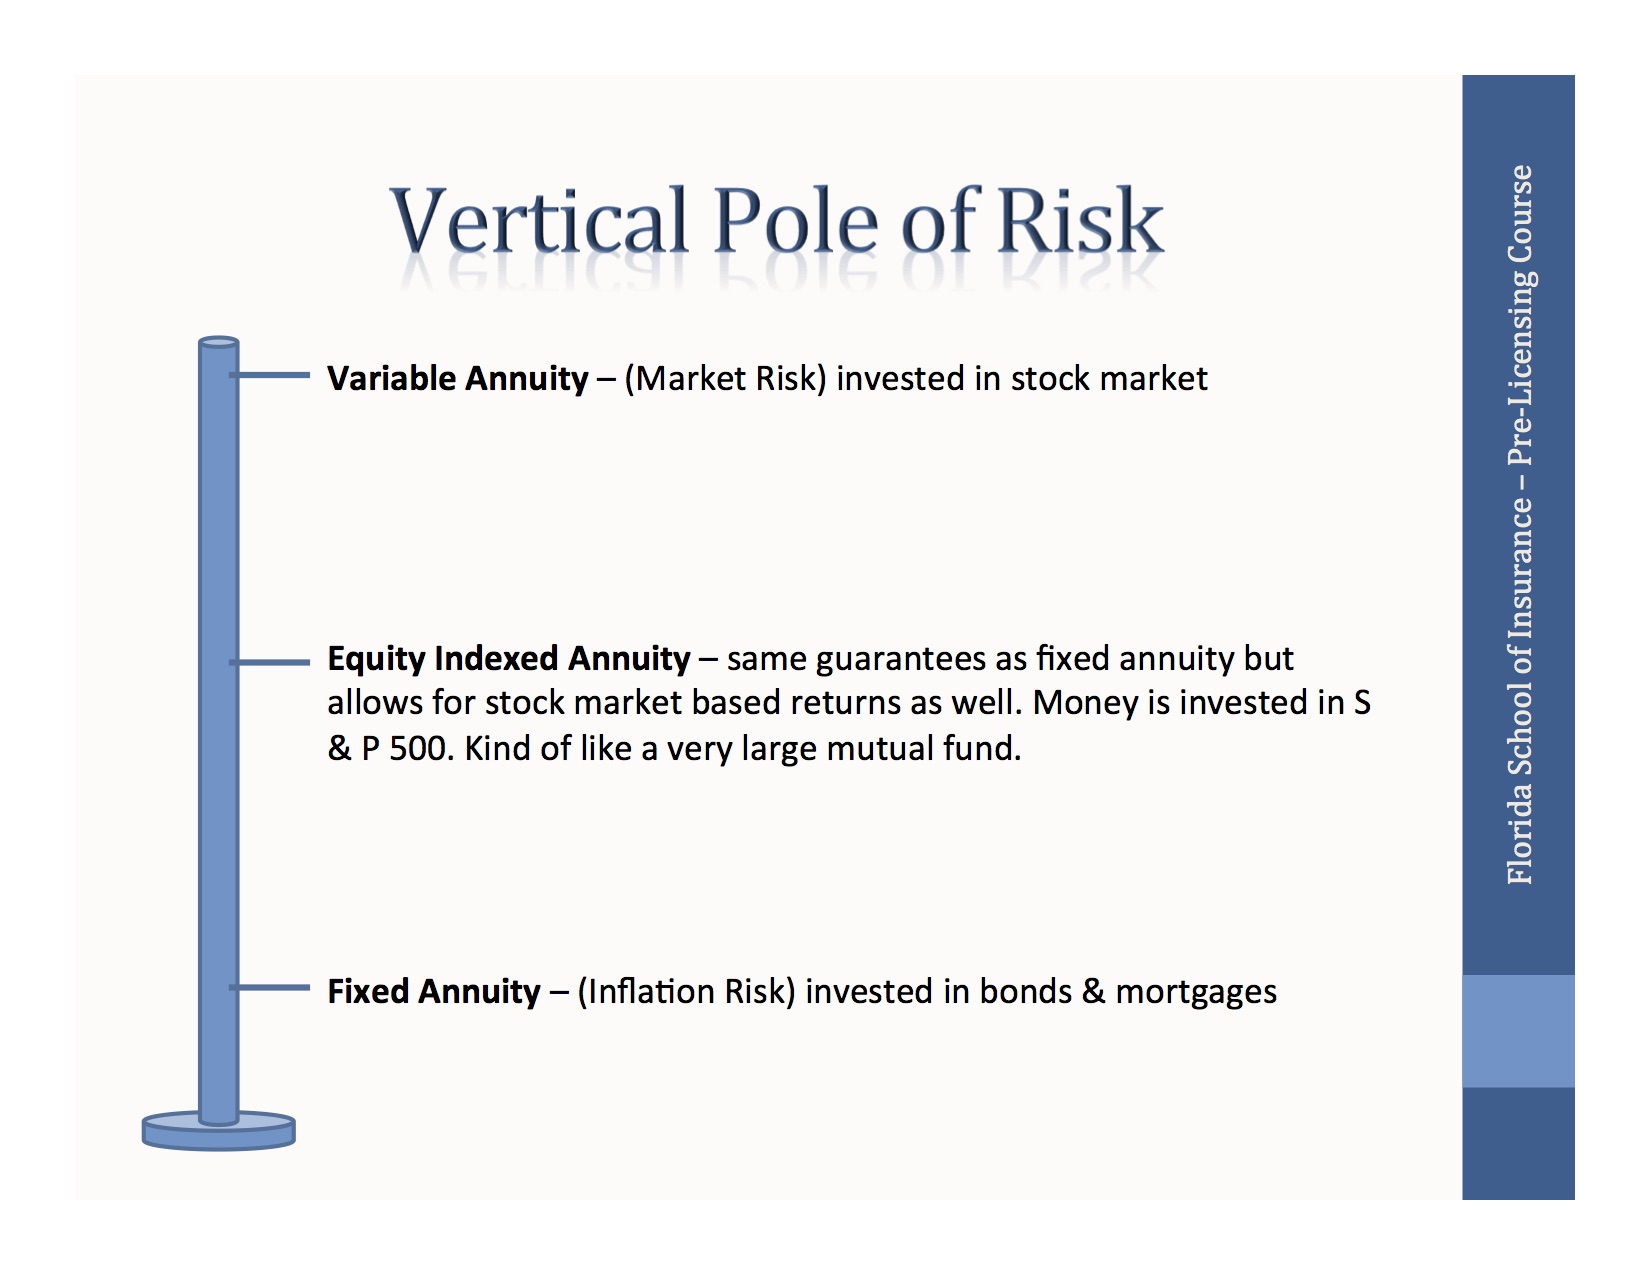 Verticle Pole of Risk